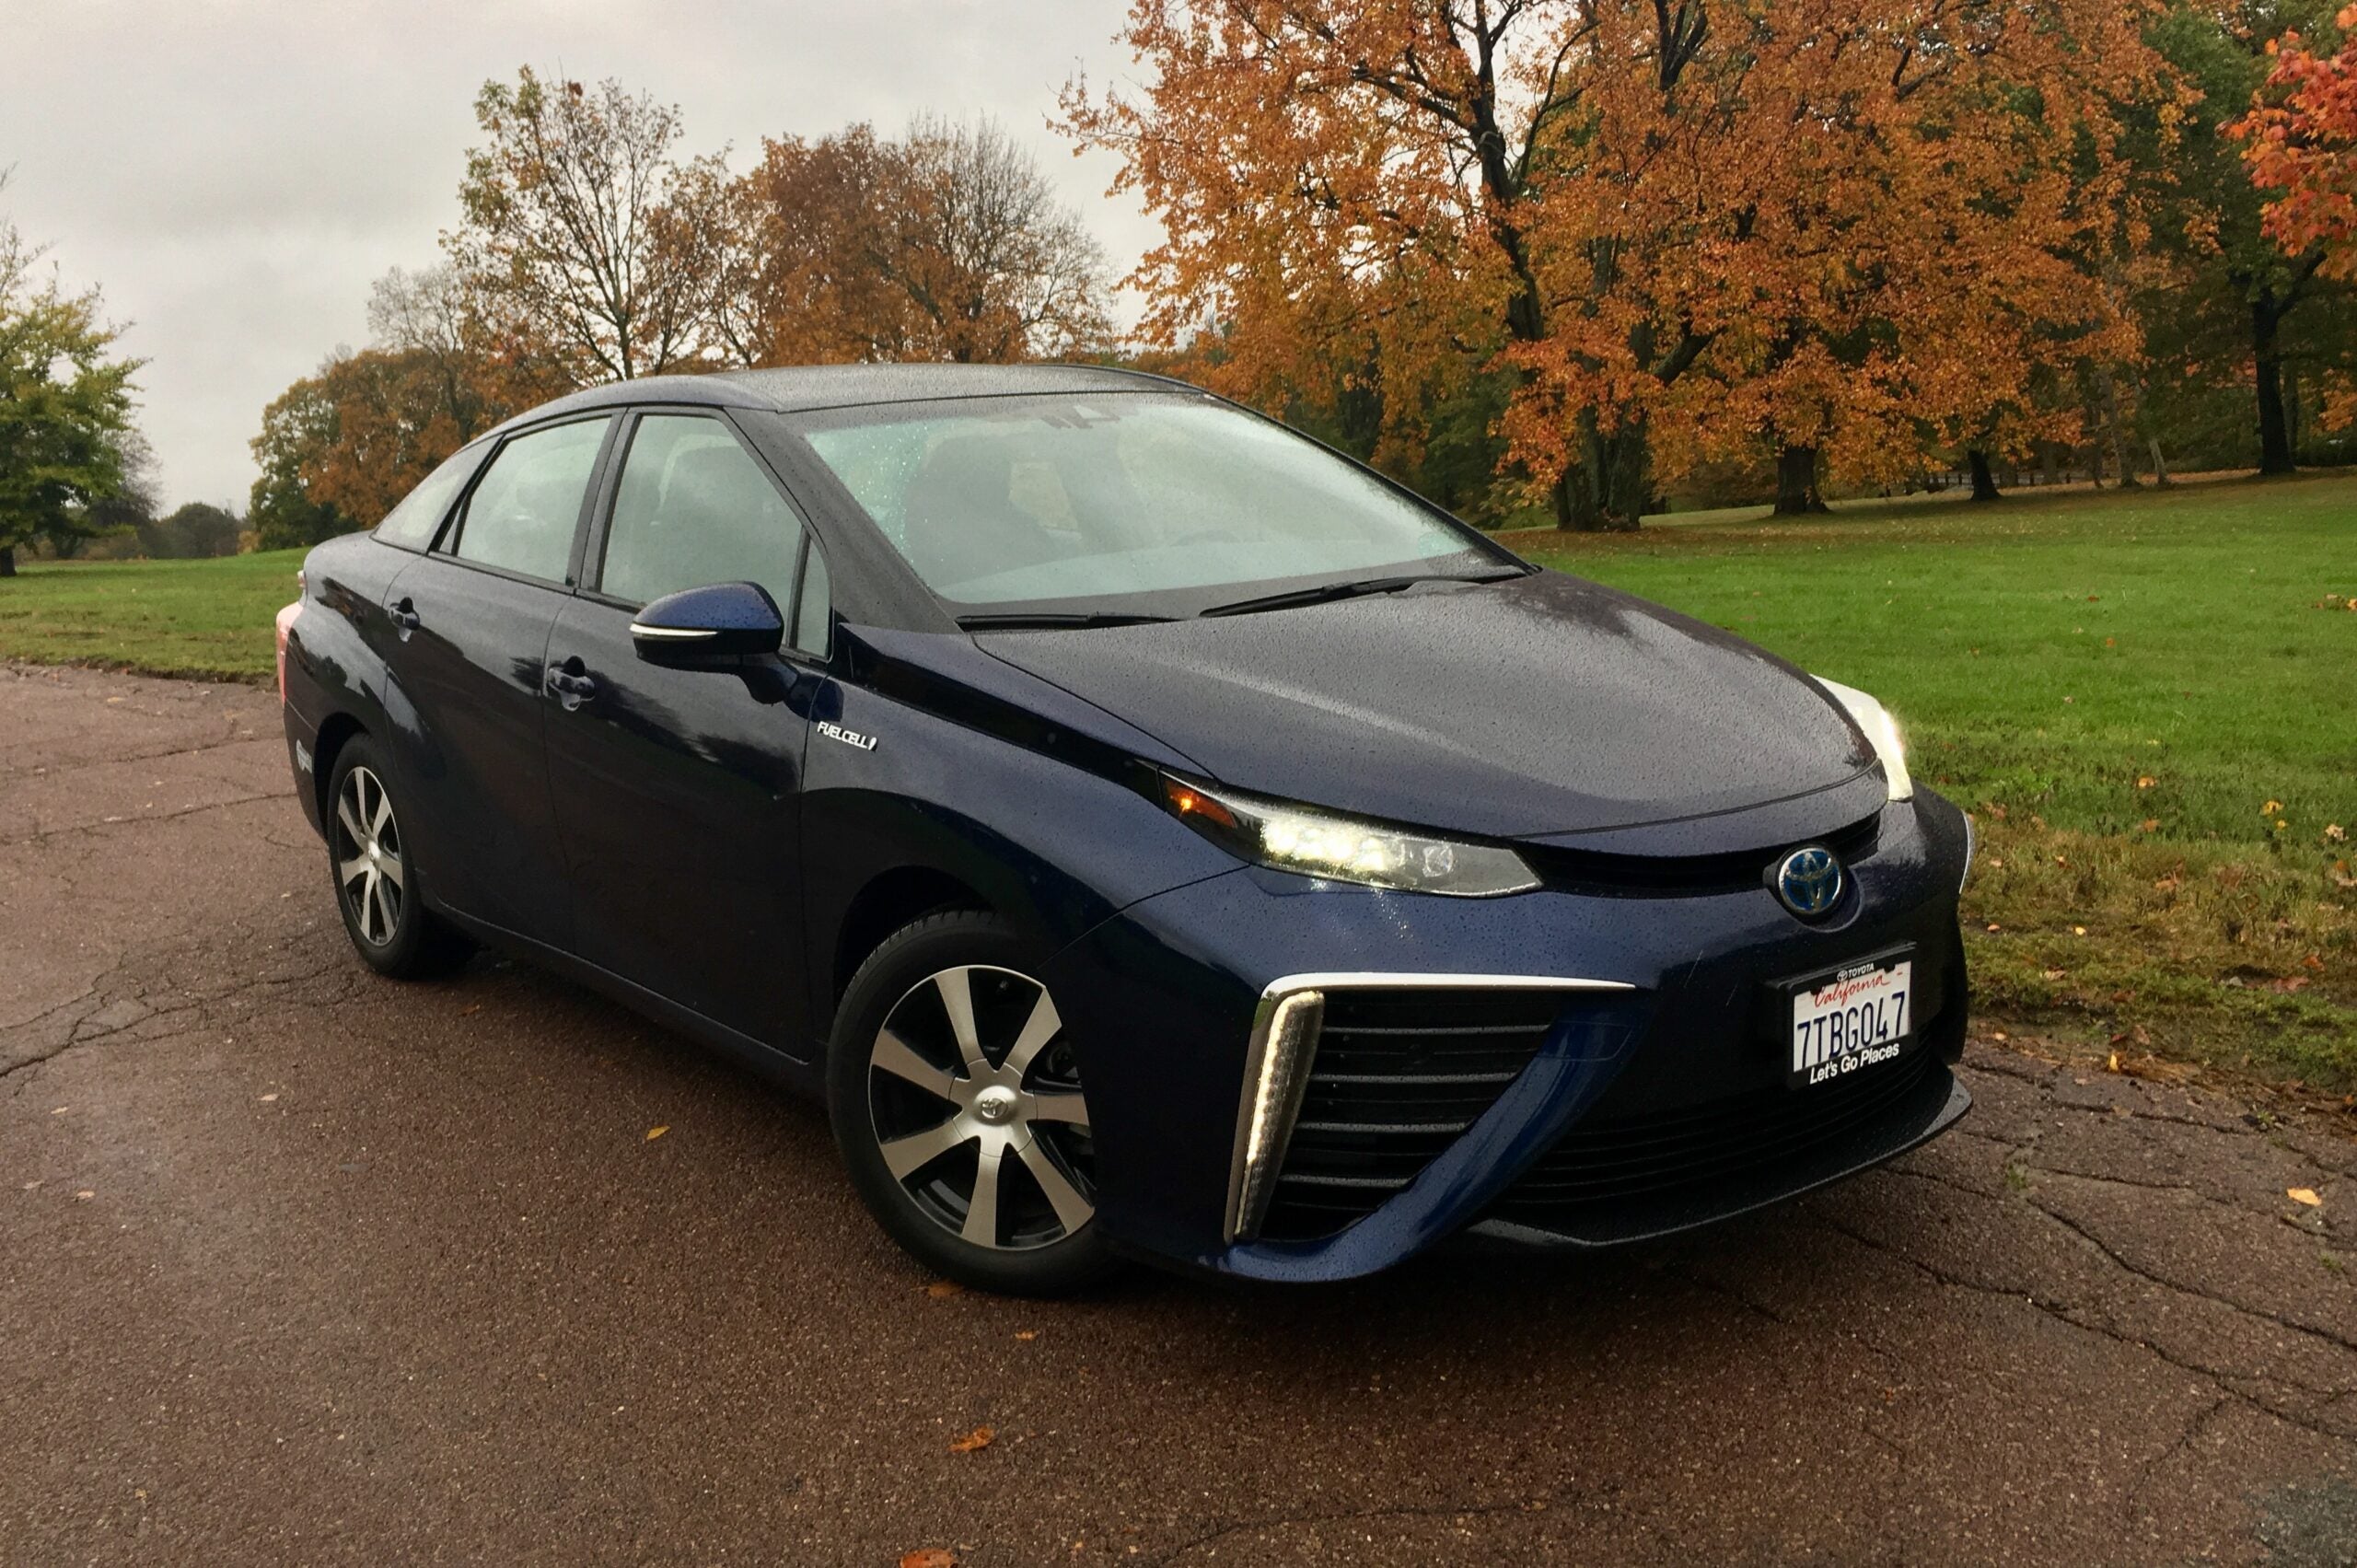 The 2018 Toyota Mirai is innovative — and impractical